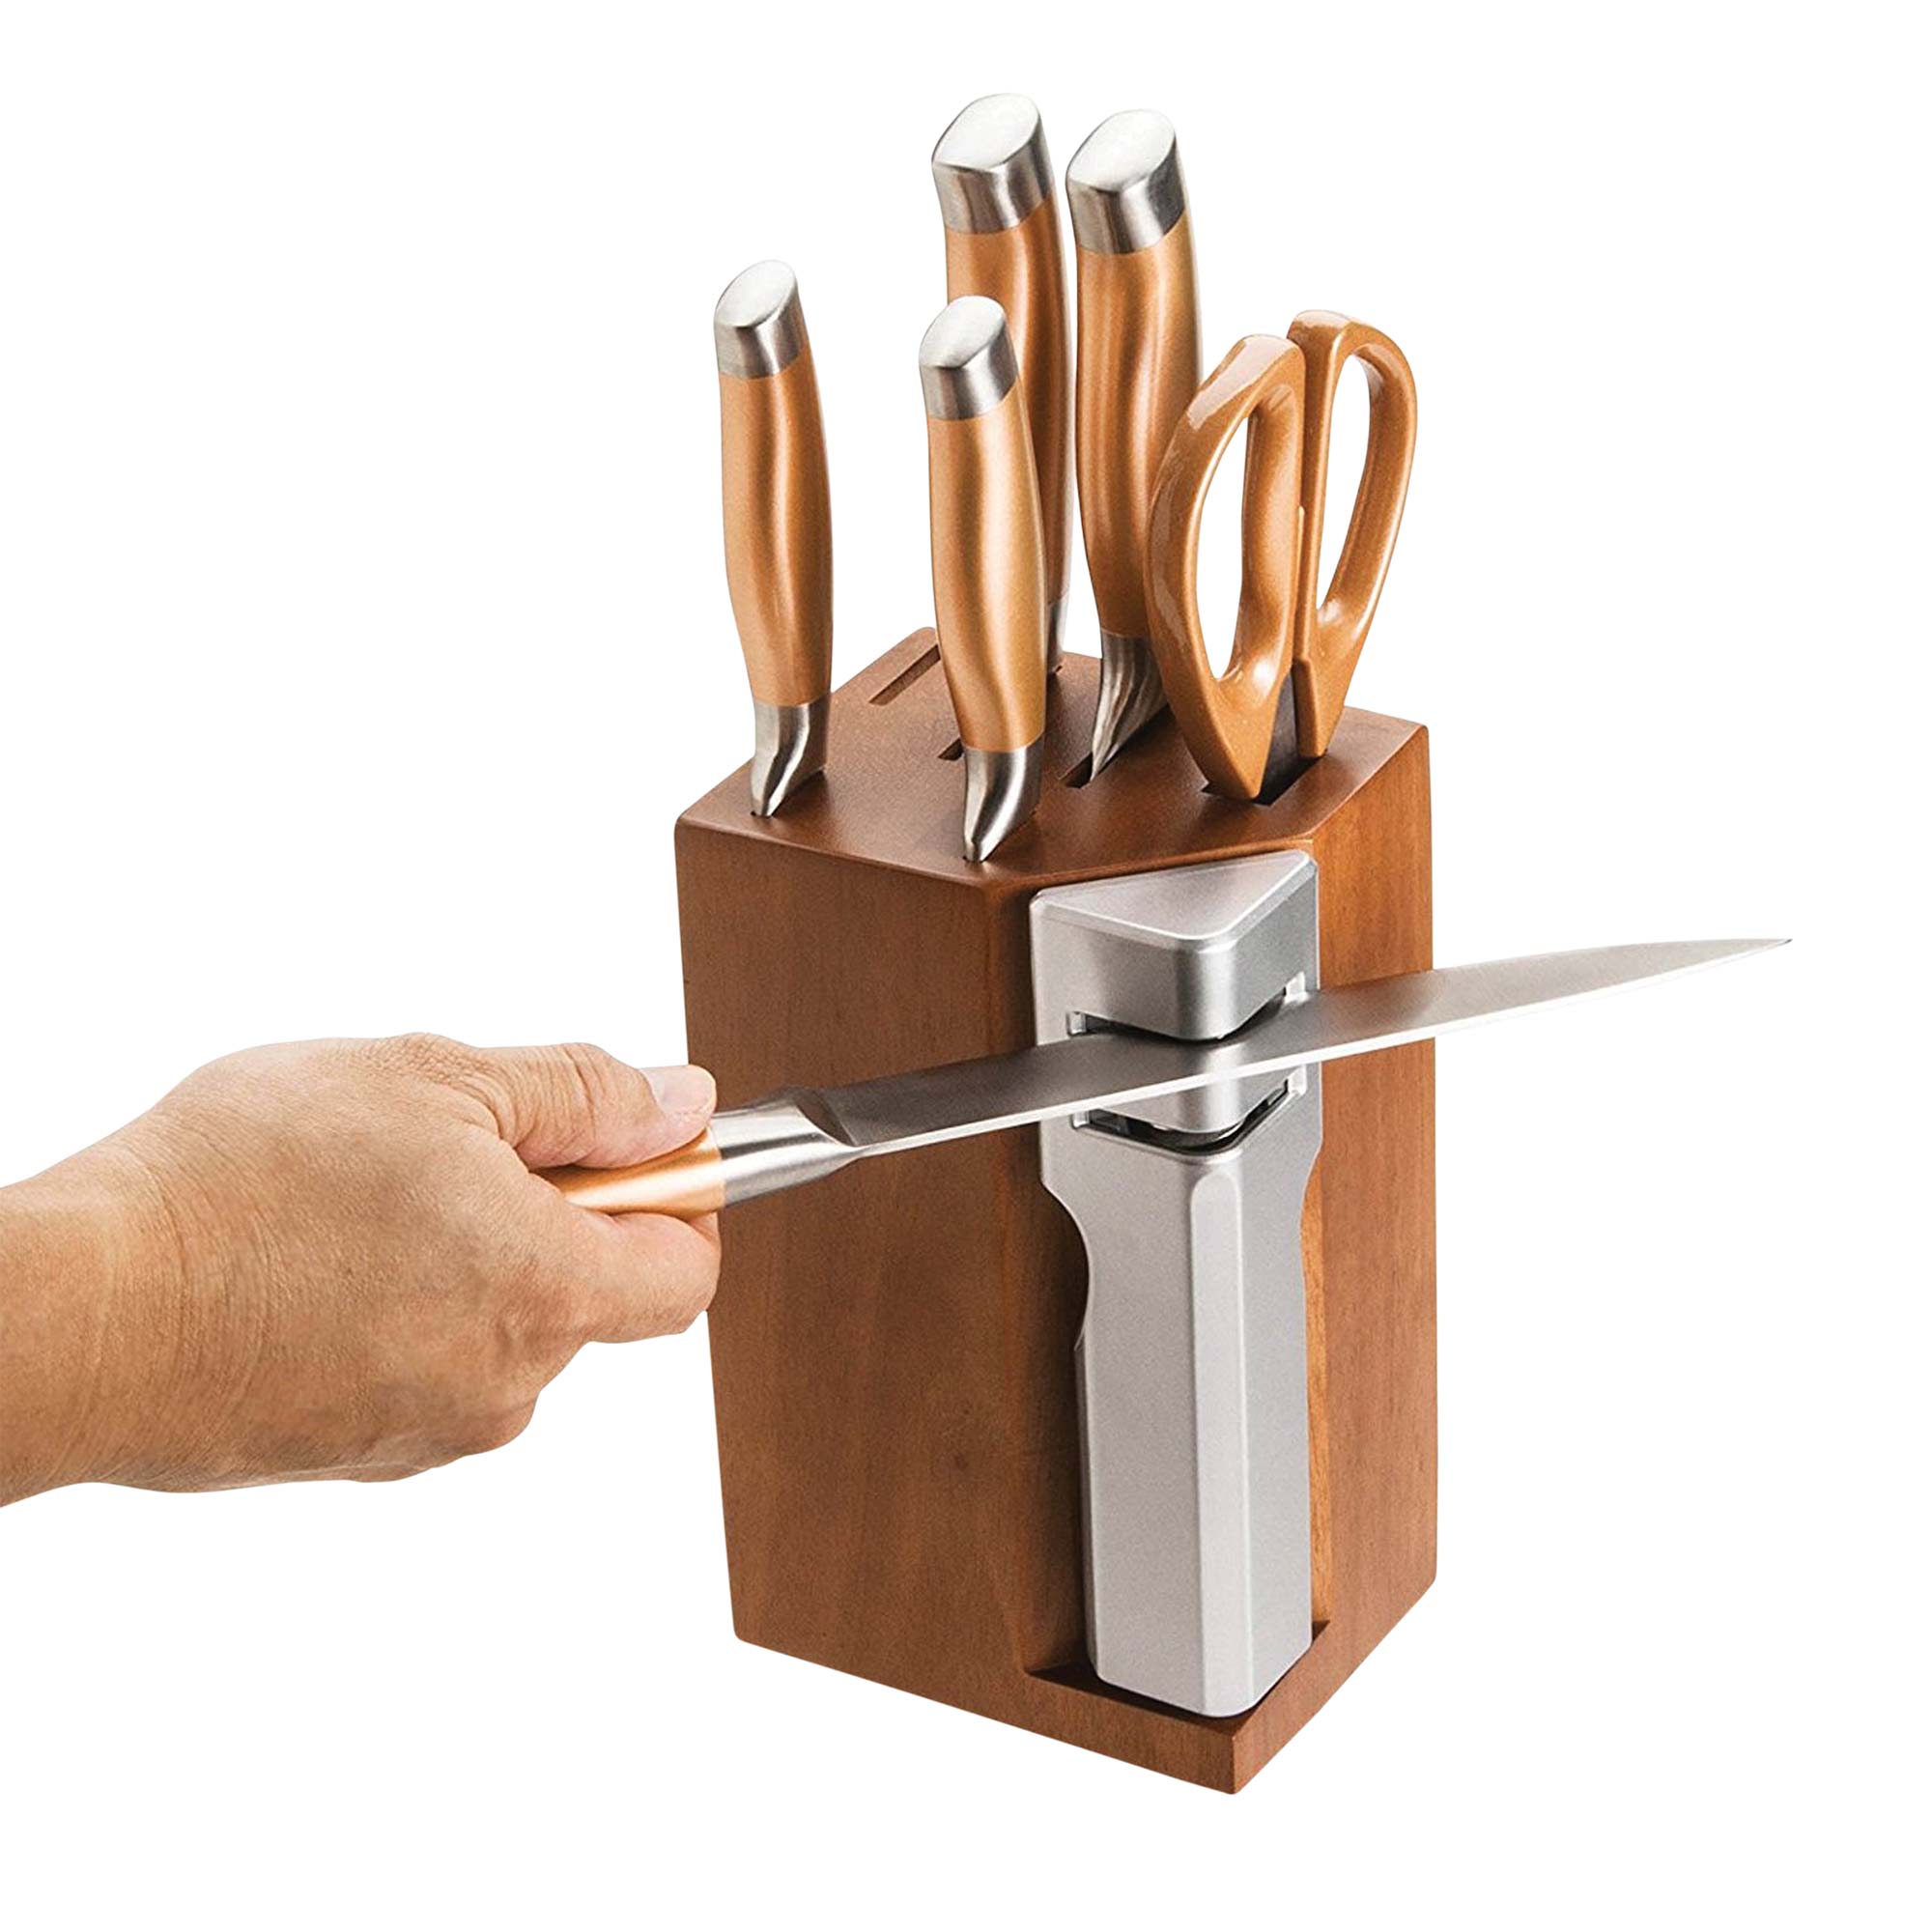 7 piece Stainless Steel Cutlery Set With detachable knife